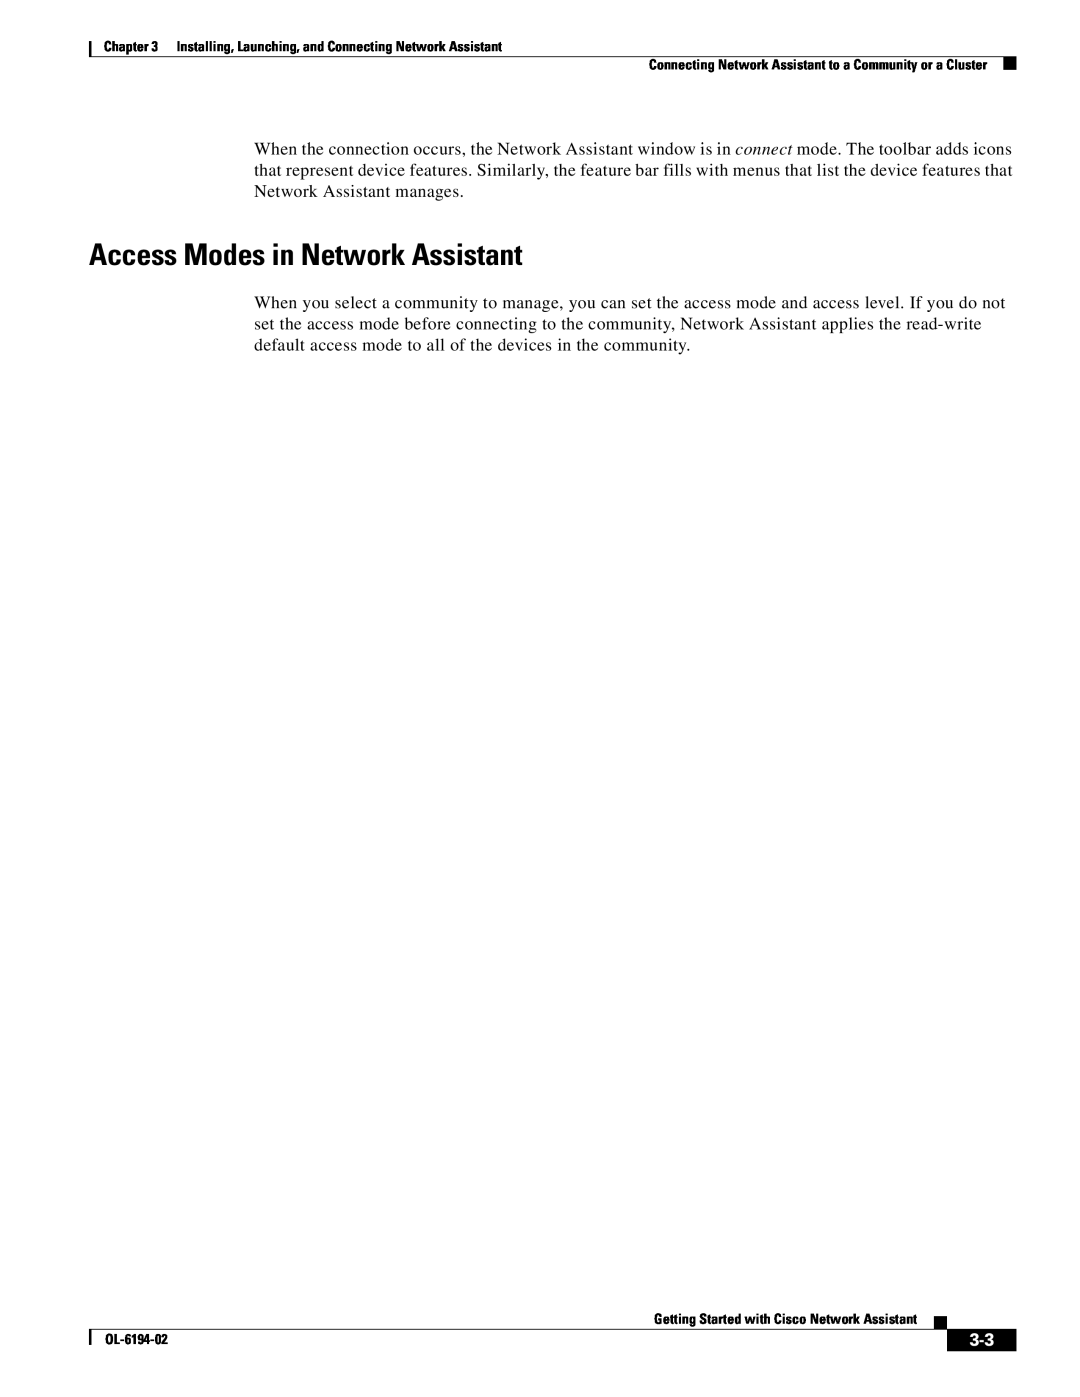 Cisco Systems and Connecting Network Assistant, Launching manual Access Modes in Network Assistant 